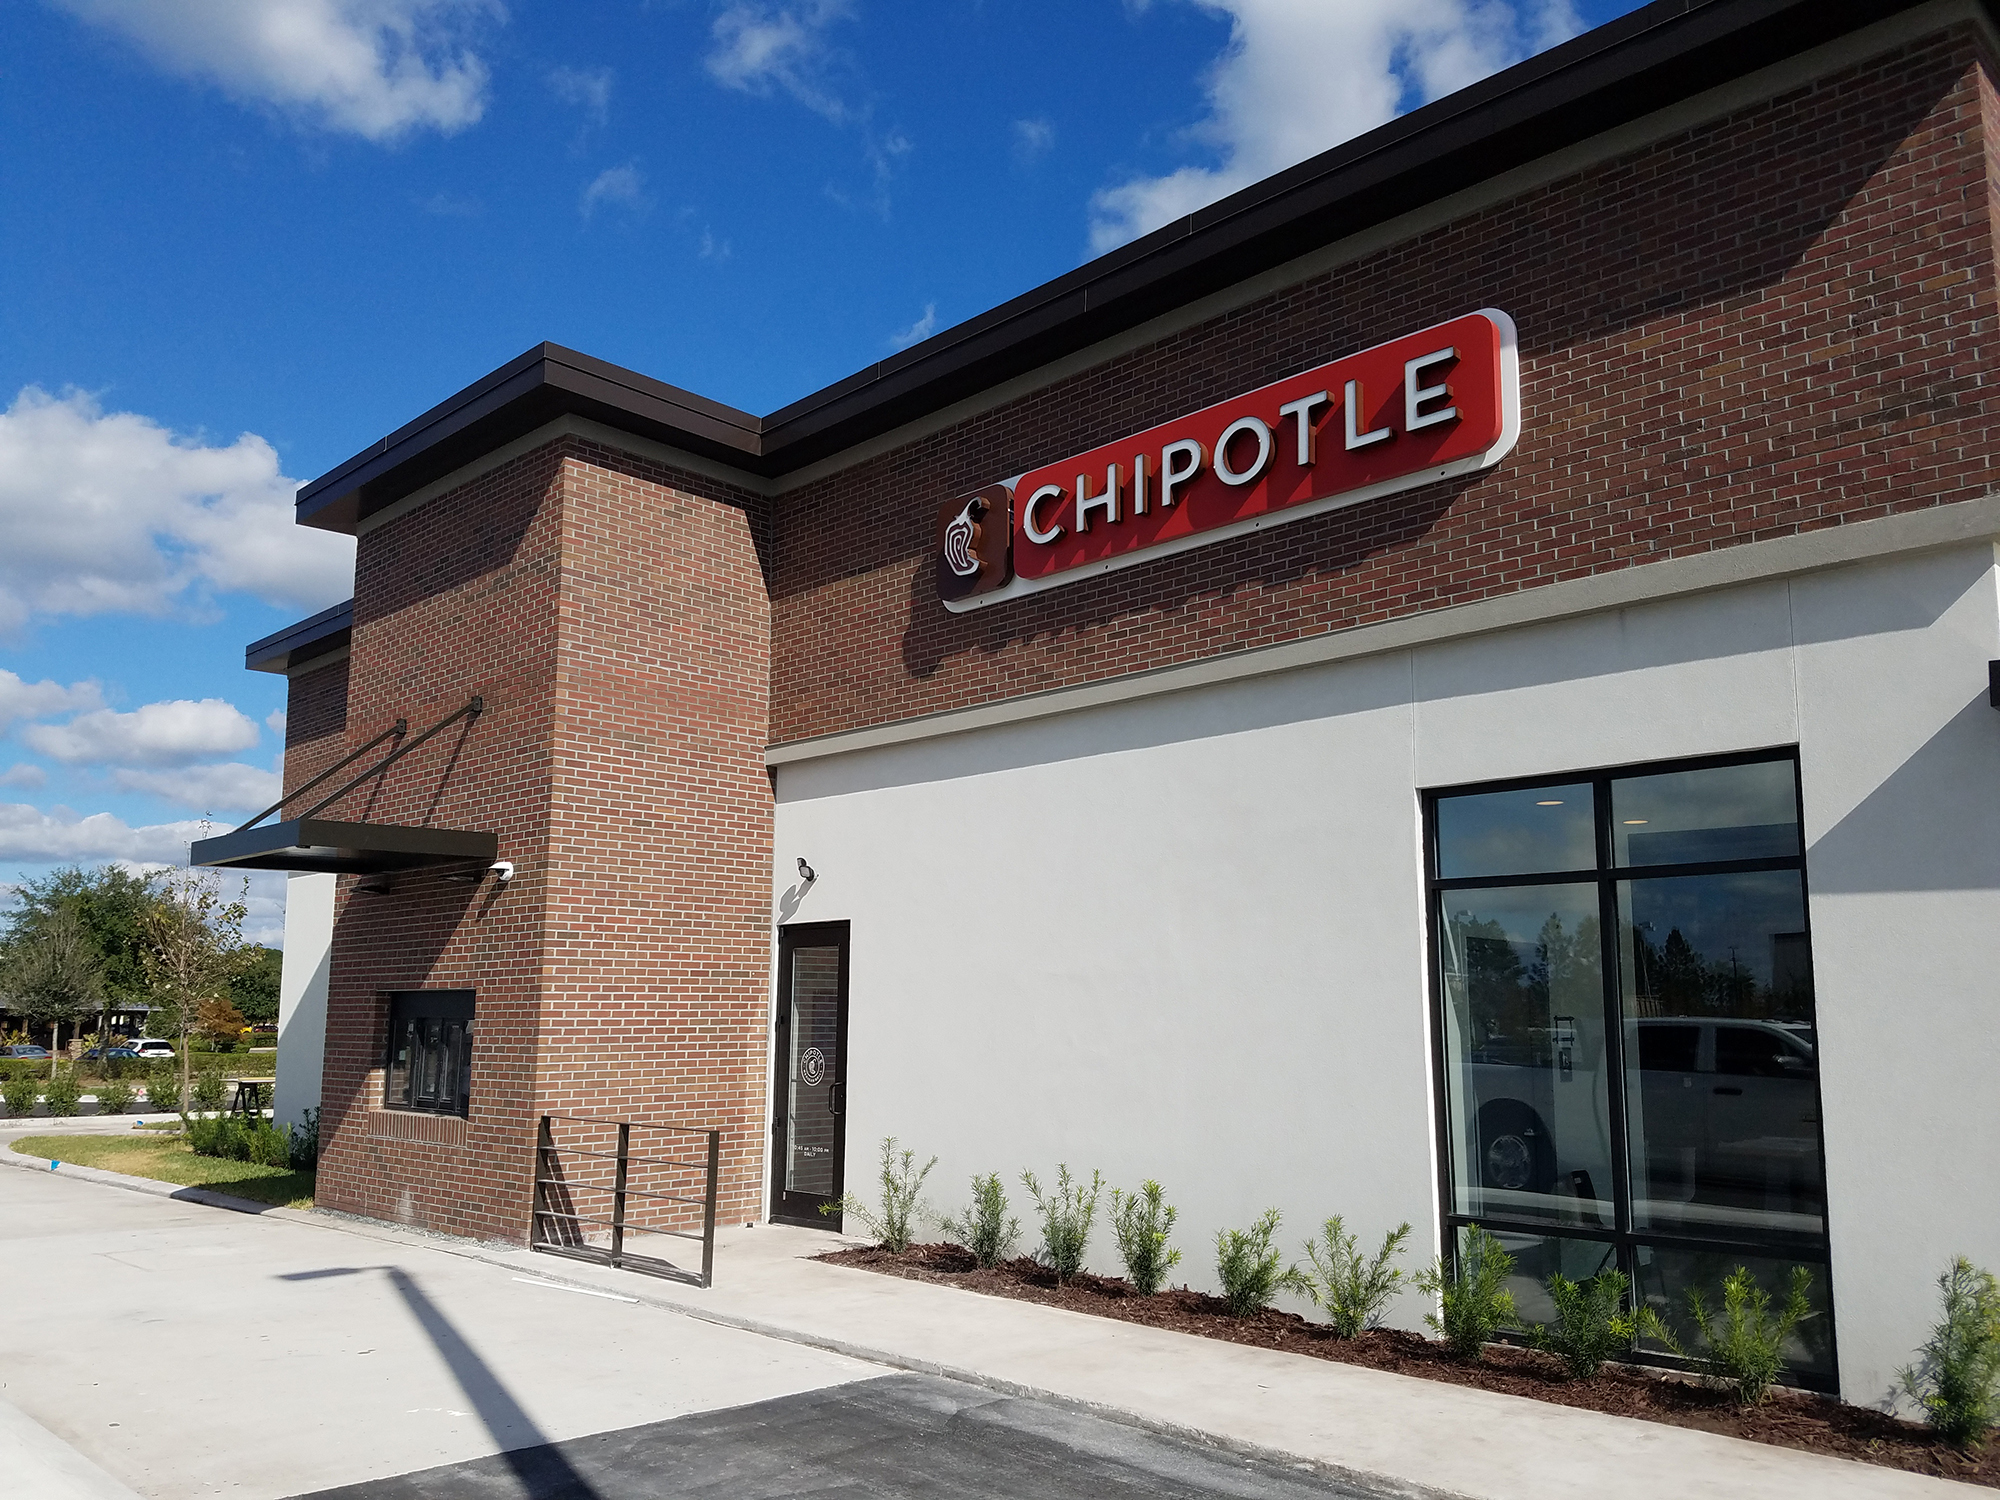 Florida’s first “Chipotlane” is coming to the Chipotle in Oakleaf Town Center.